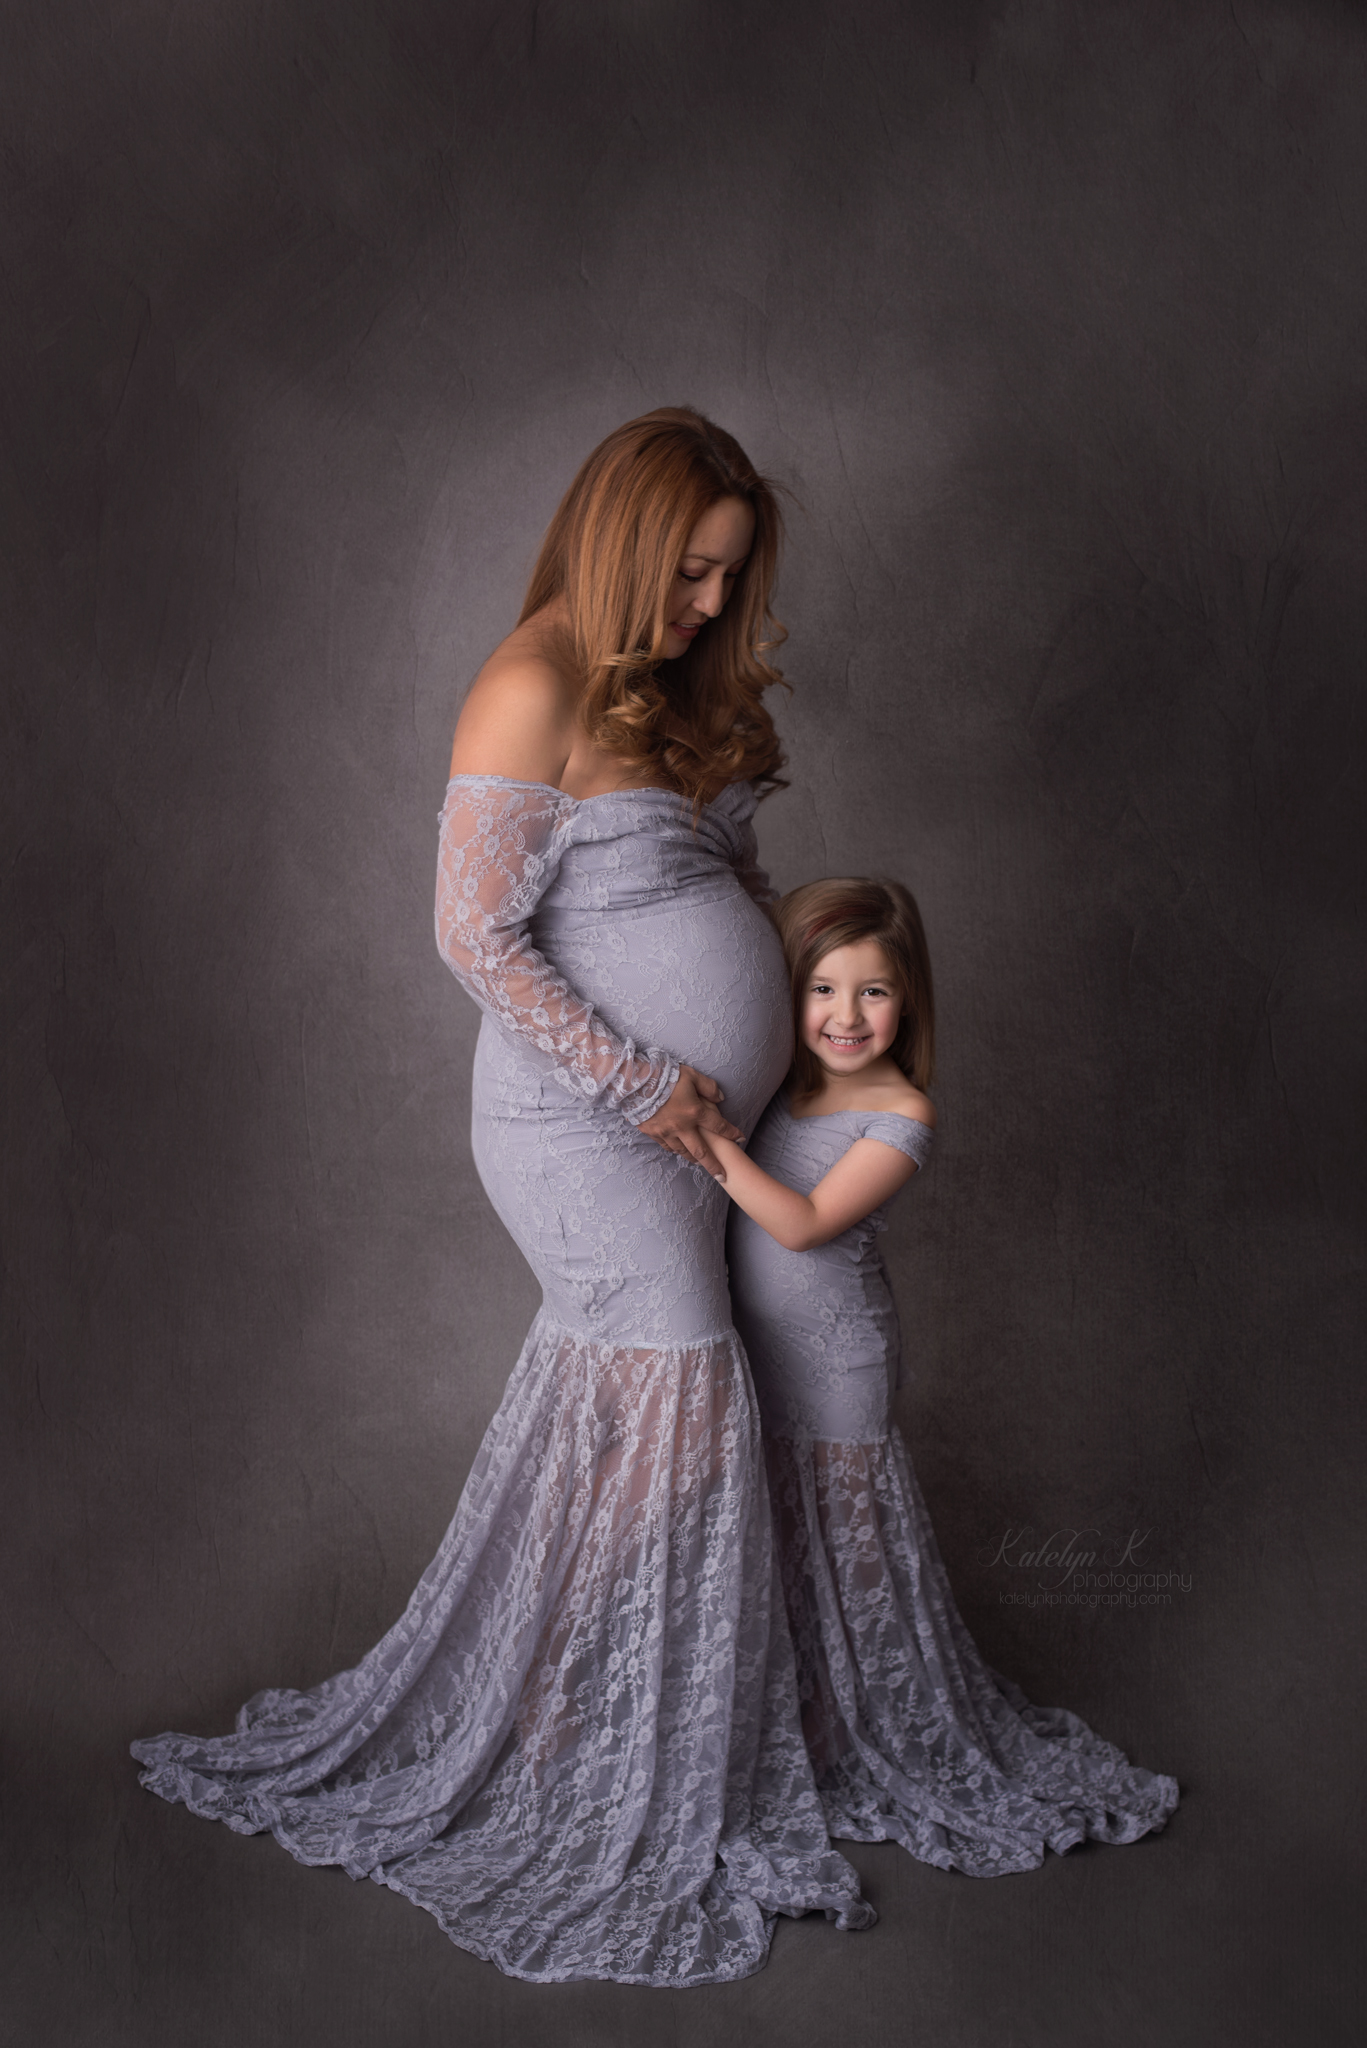 Maternity Gowns | NH & MA Family, Newborn, Maternity, Photographer